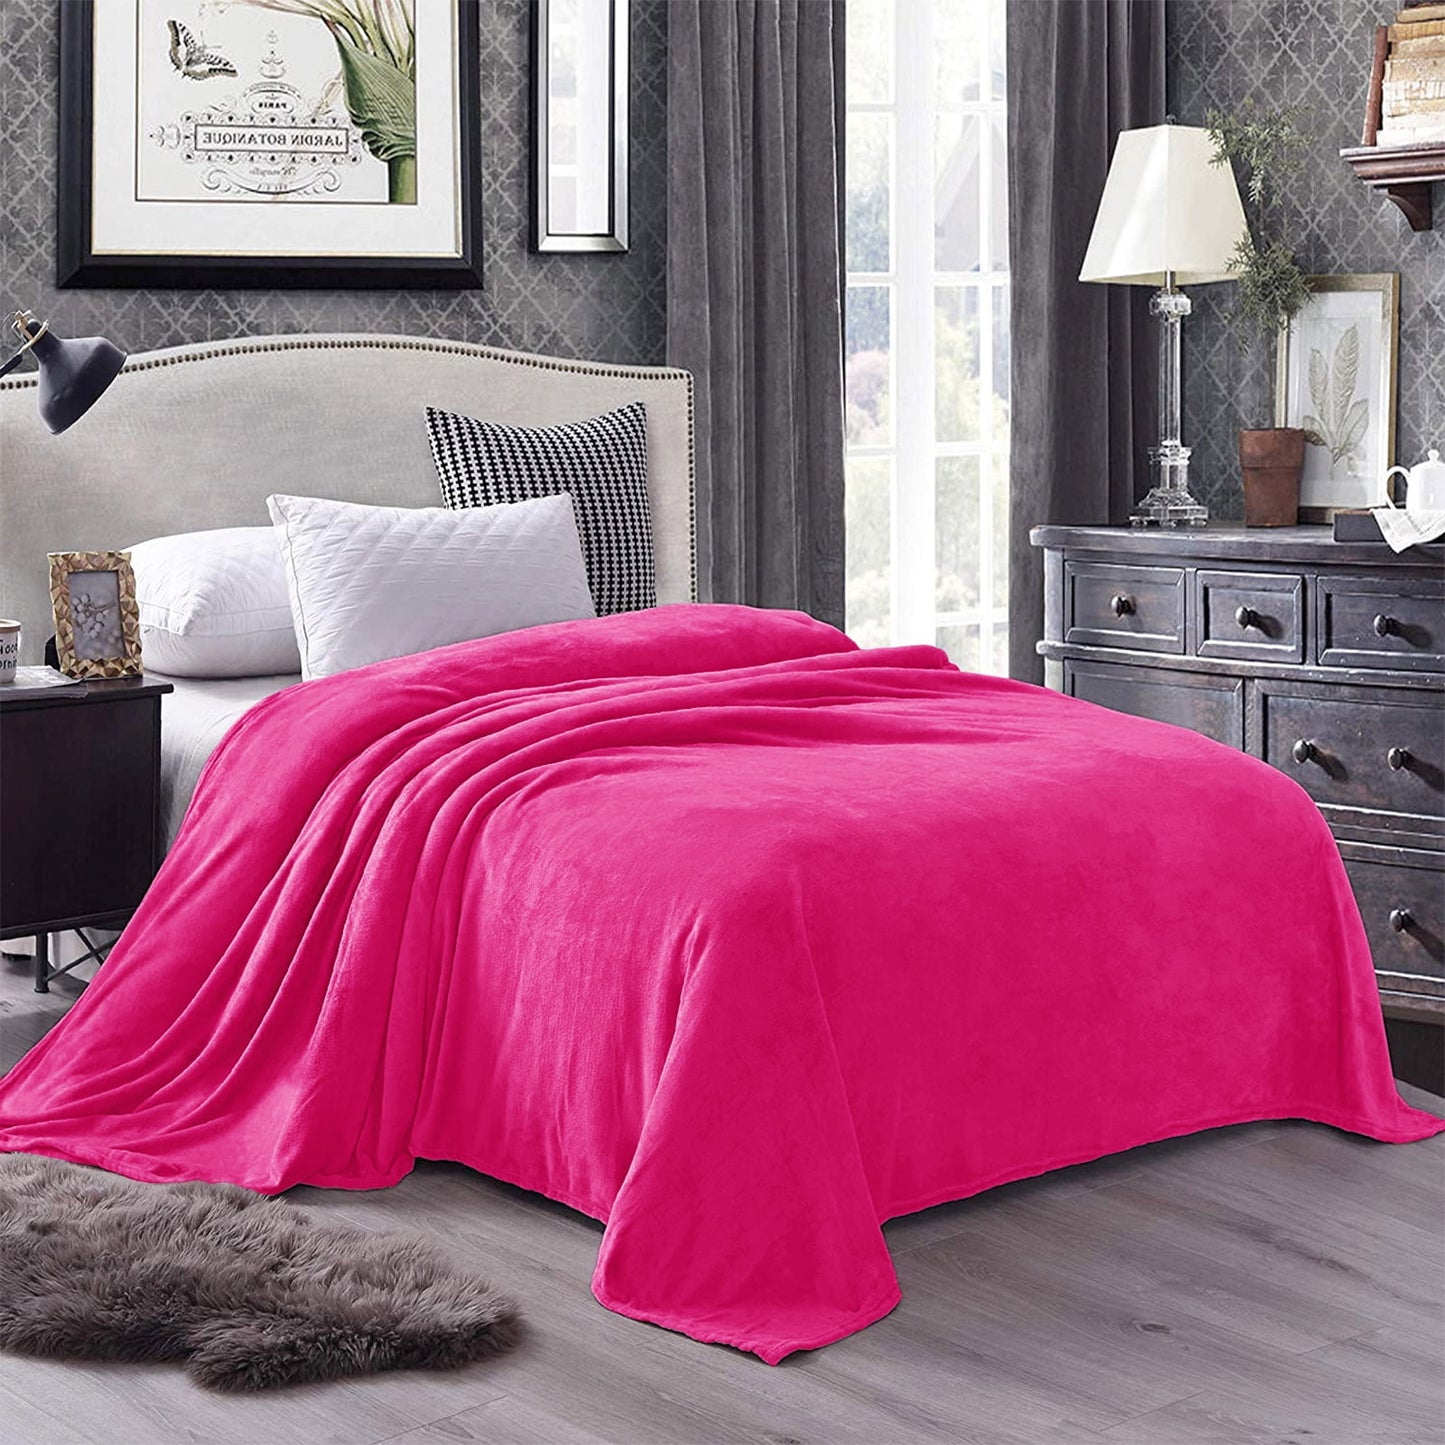 Exclusivo Mezcla Twin Size Flannel Fleece Velvet Plush Bed Blanket as Bedspread, Coverlet, Bed Cover (90x66 inches, Hot Pink) Soft, Lightweight, Warm and Cozy